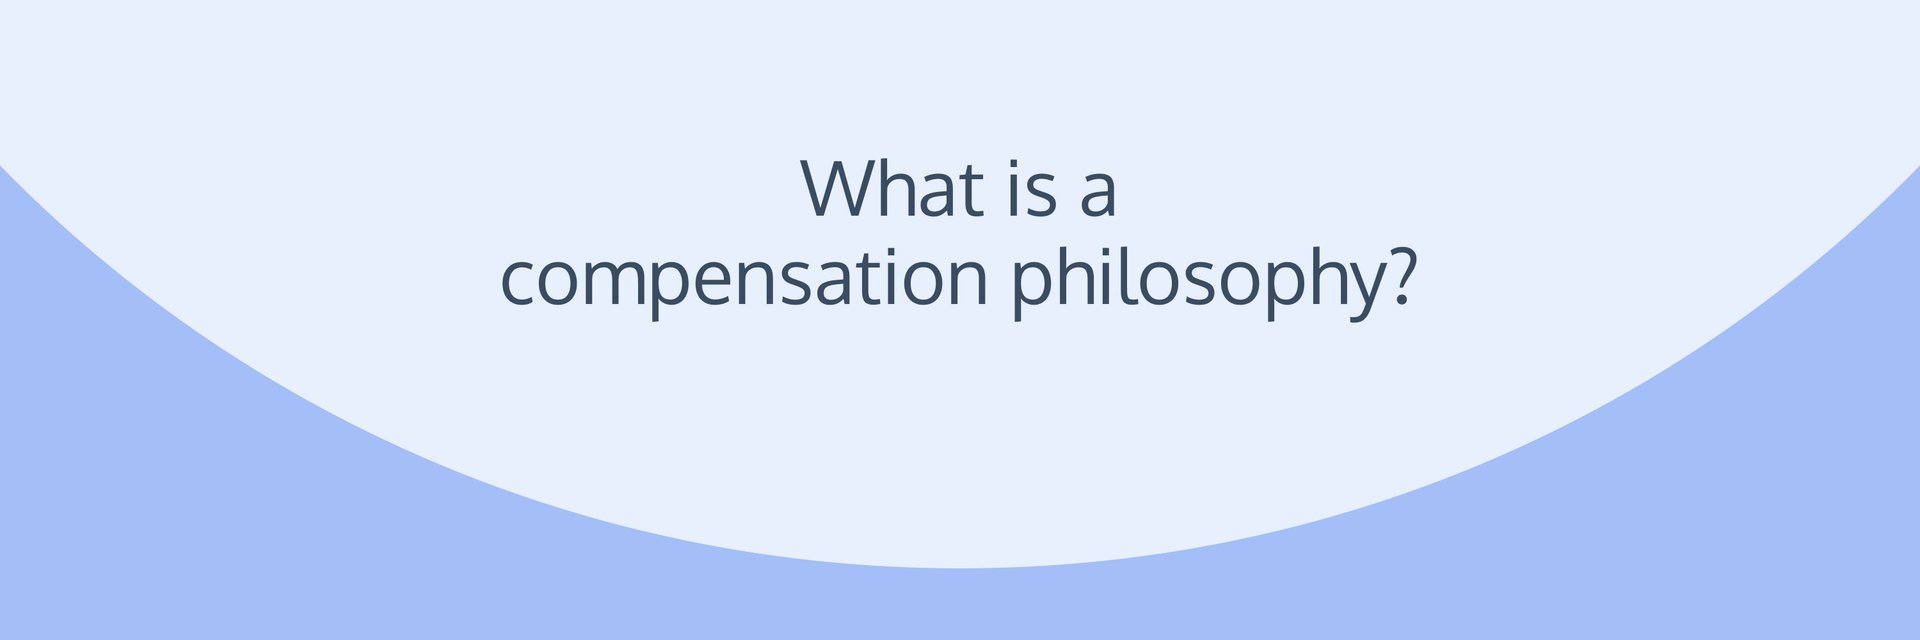 What is a compensation philosophy?